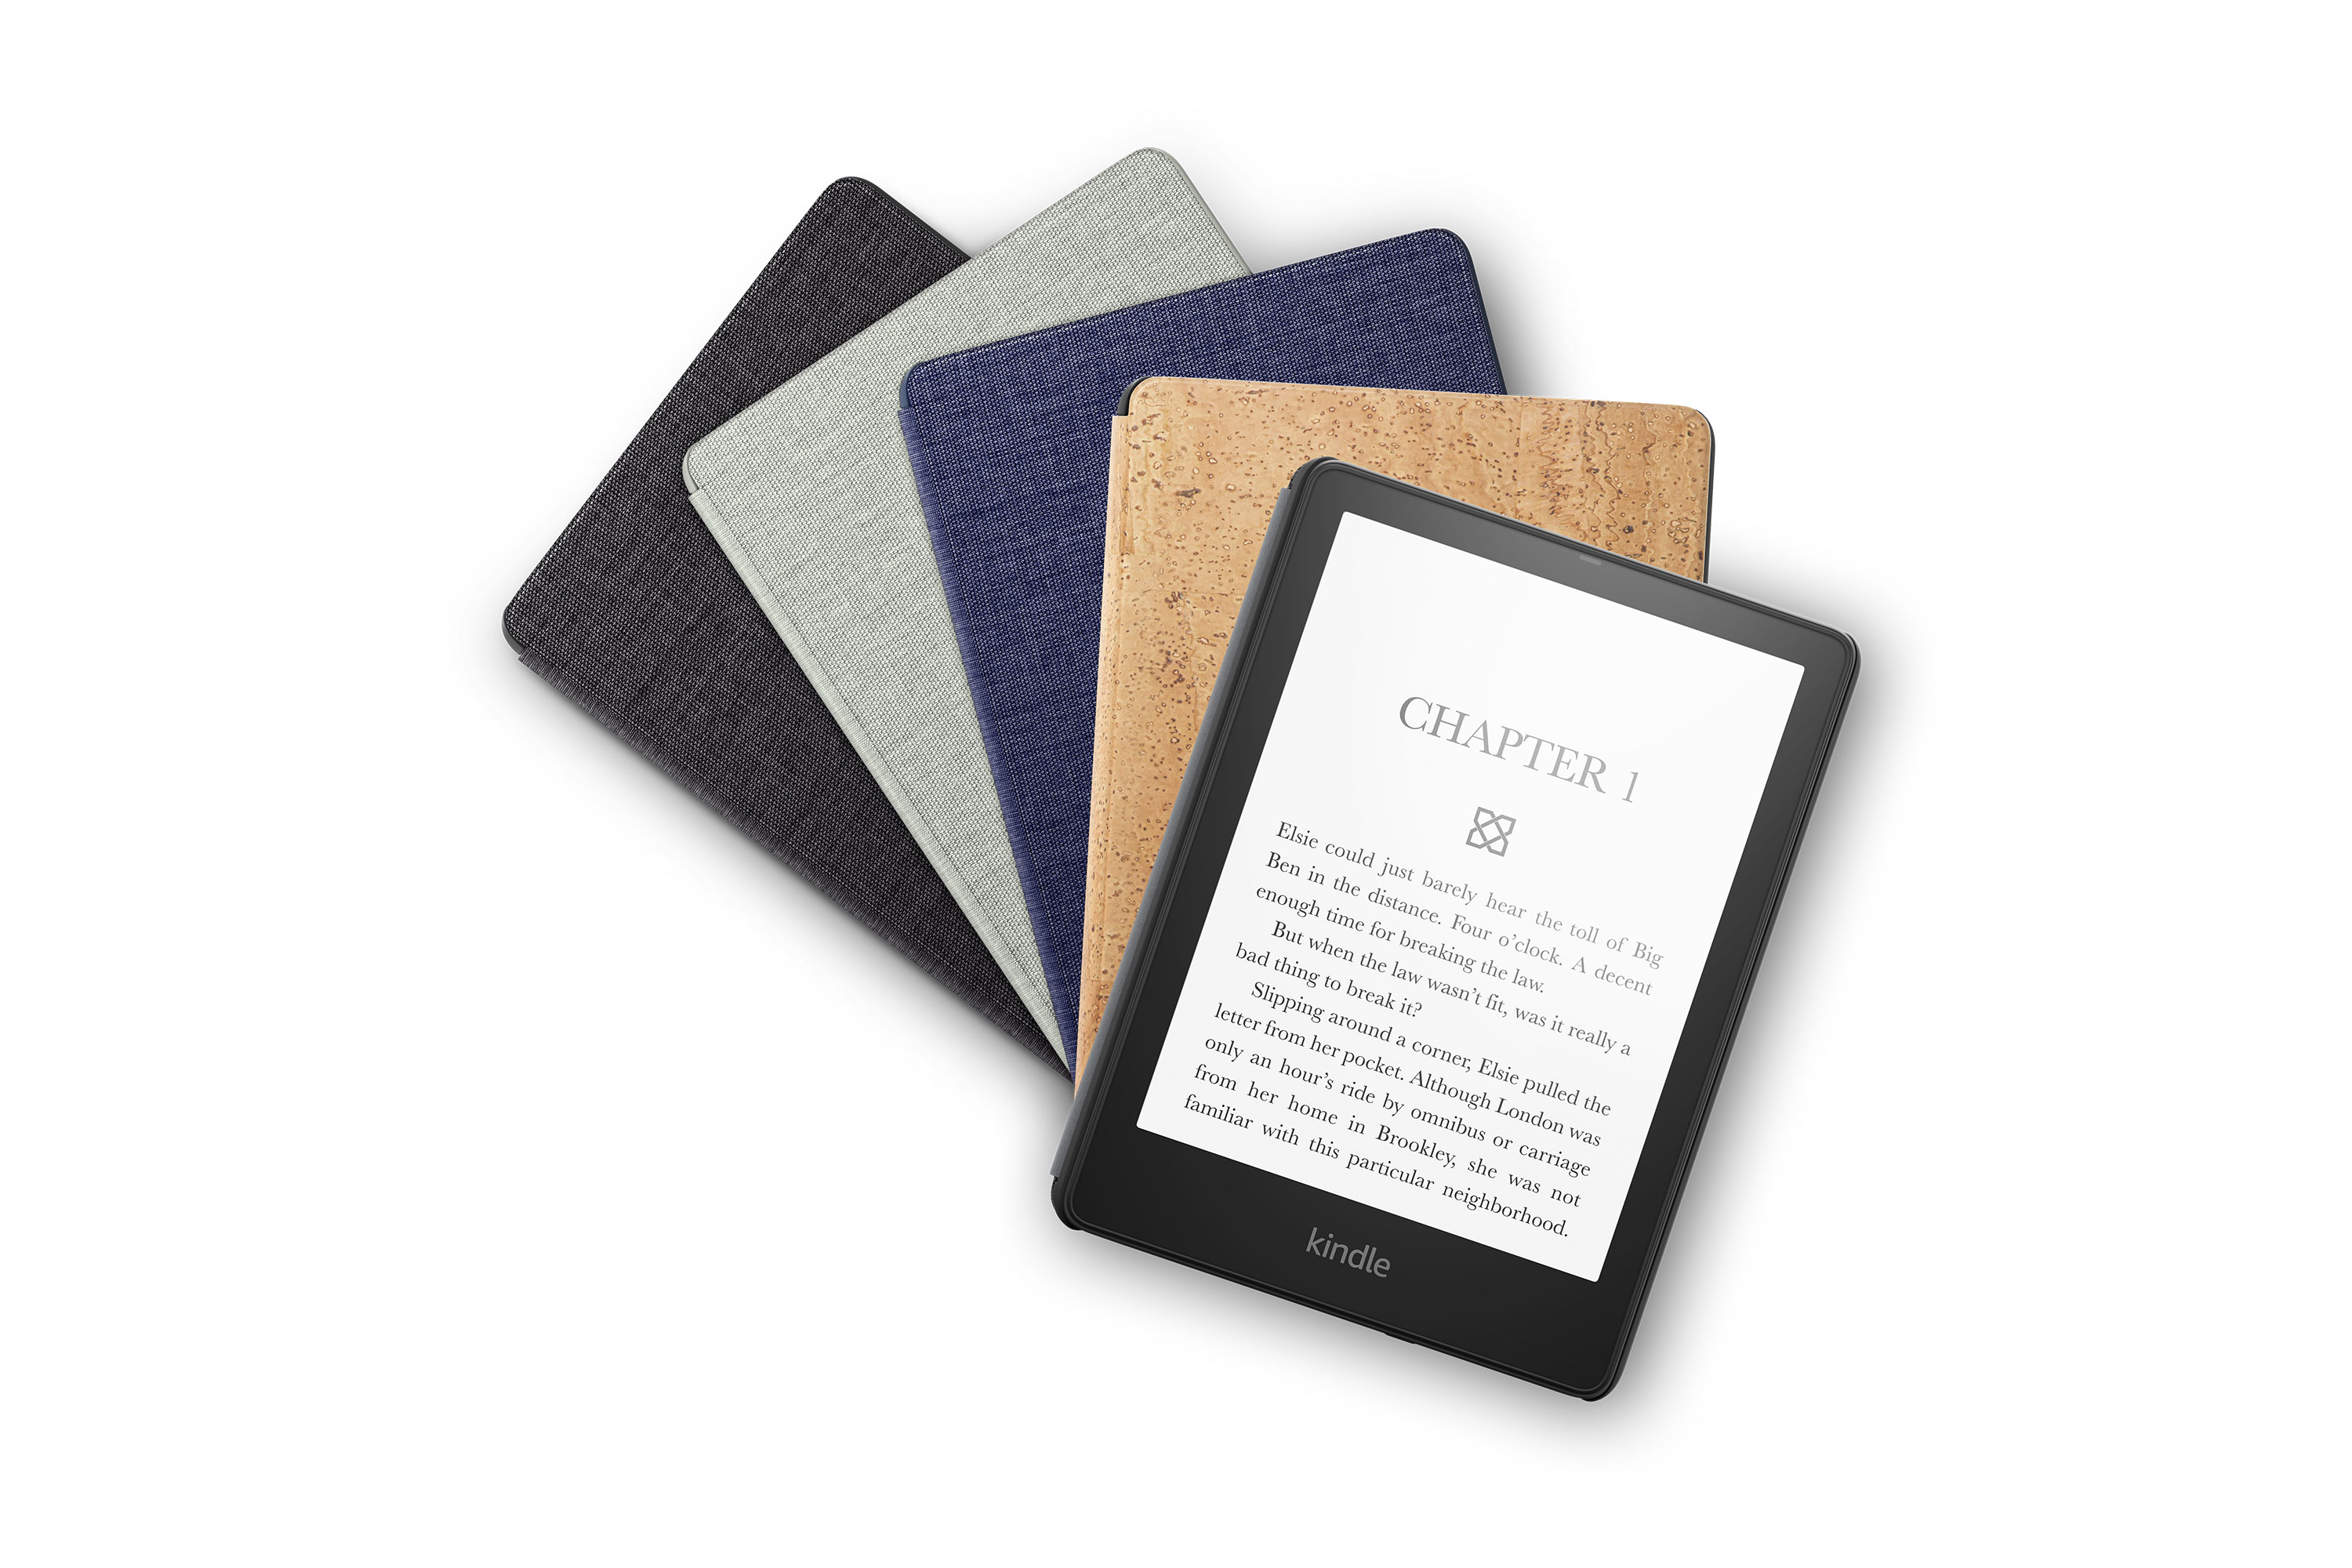 Kindle Paperwhite now comes in Agave Green and Denim, prices are